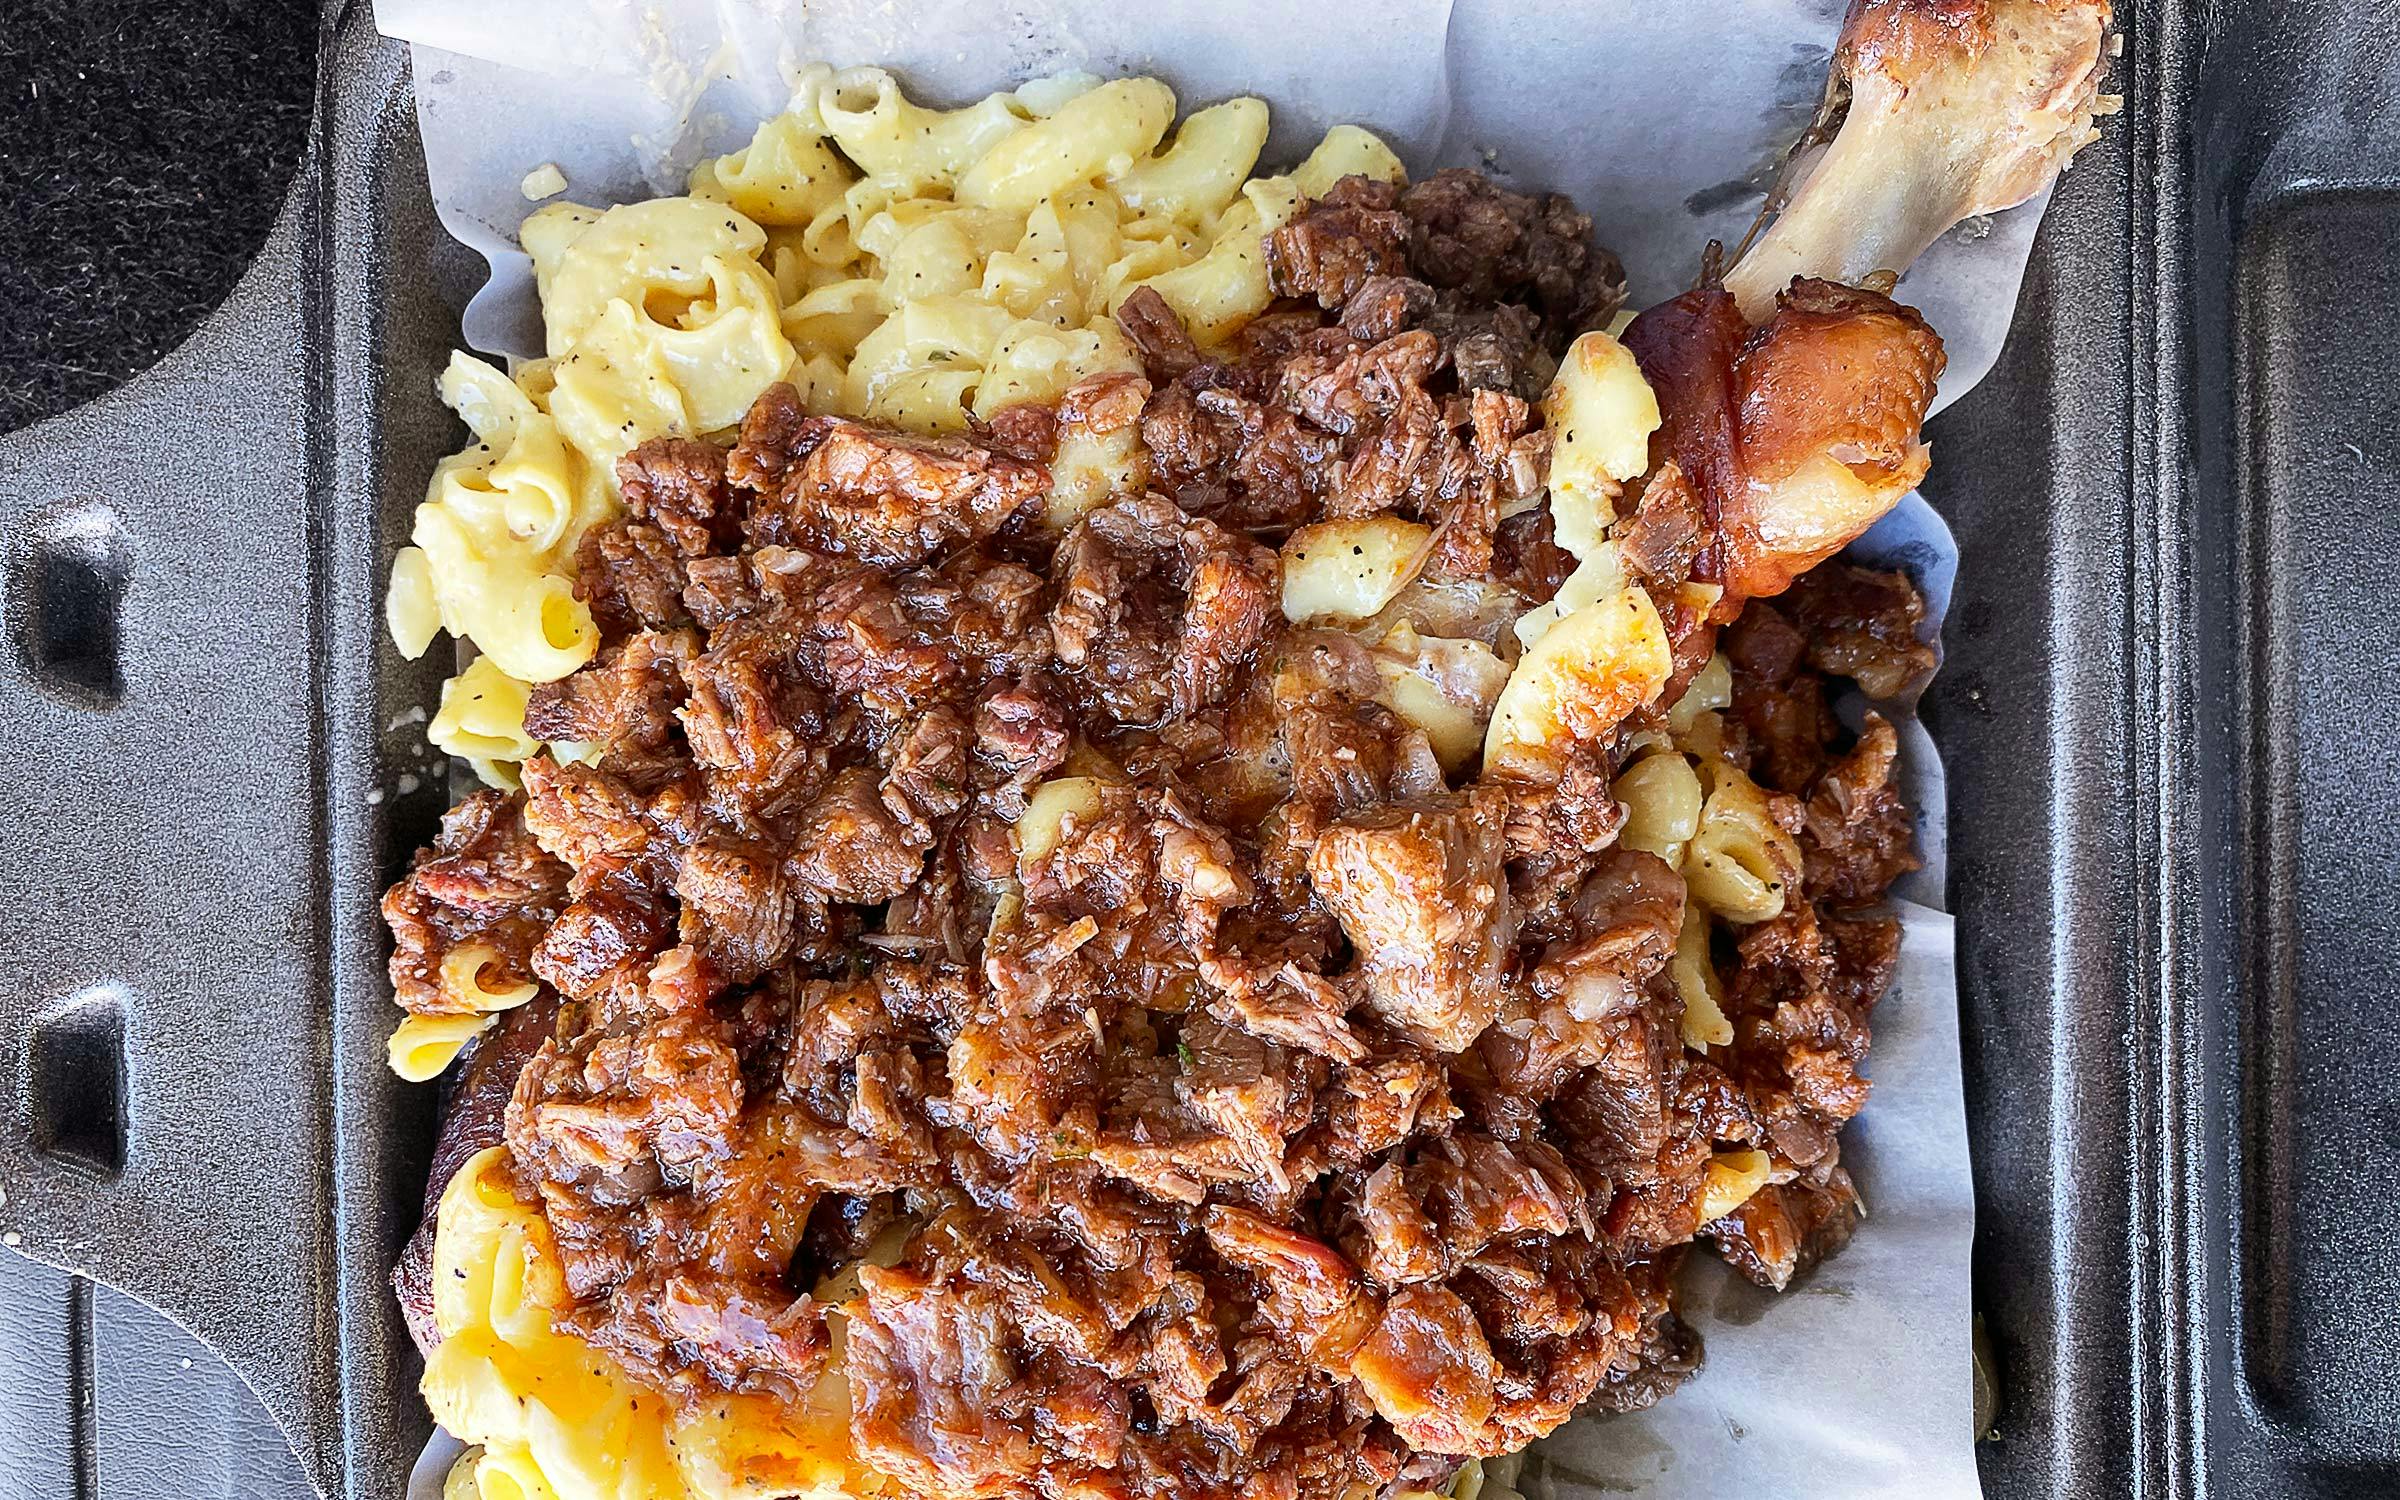 Turkey Legs Smothered In Mac And Cheese Are The Latest Greatest Texas